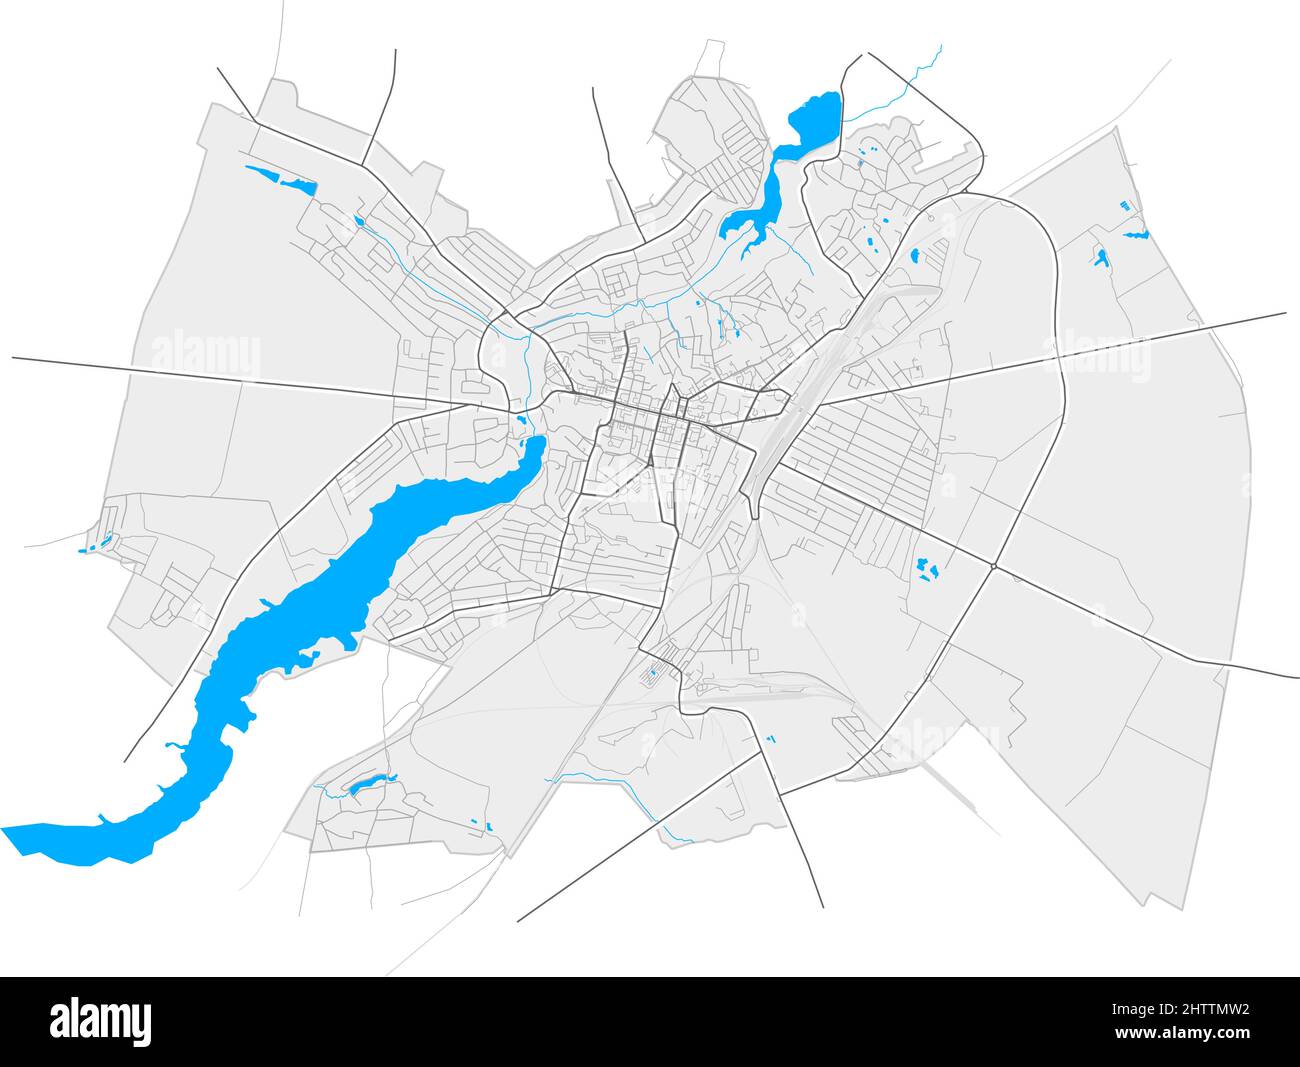 Fastiv, Kiev Oblast, Ukraine high resolution vector map with city boundaries and outlined paths. White additional outlines for main roads. Many detail Stock Vector